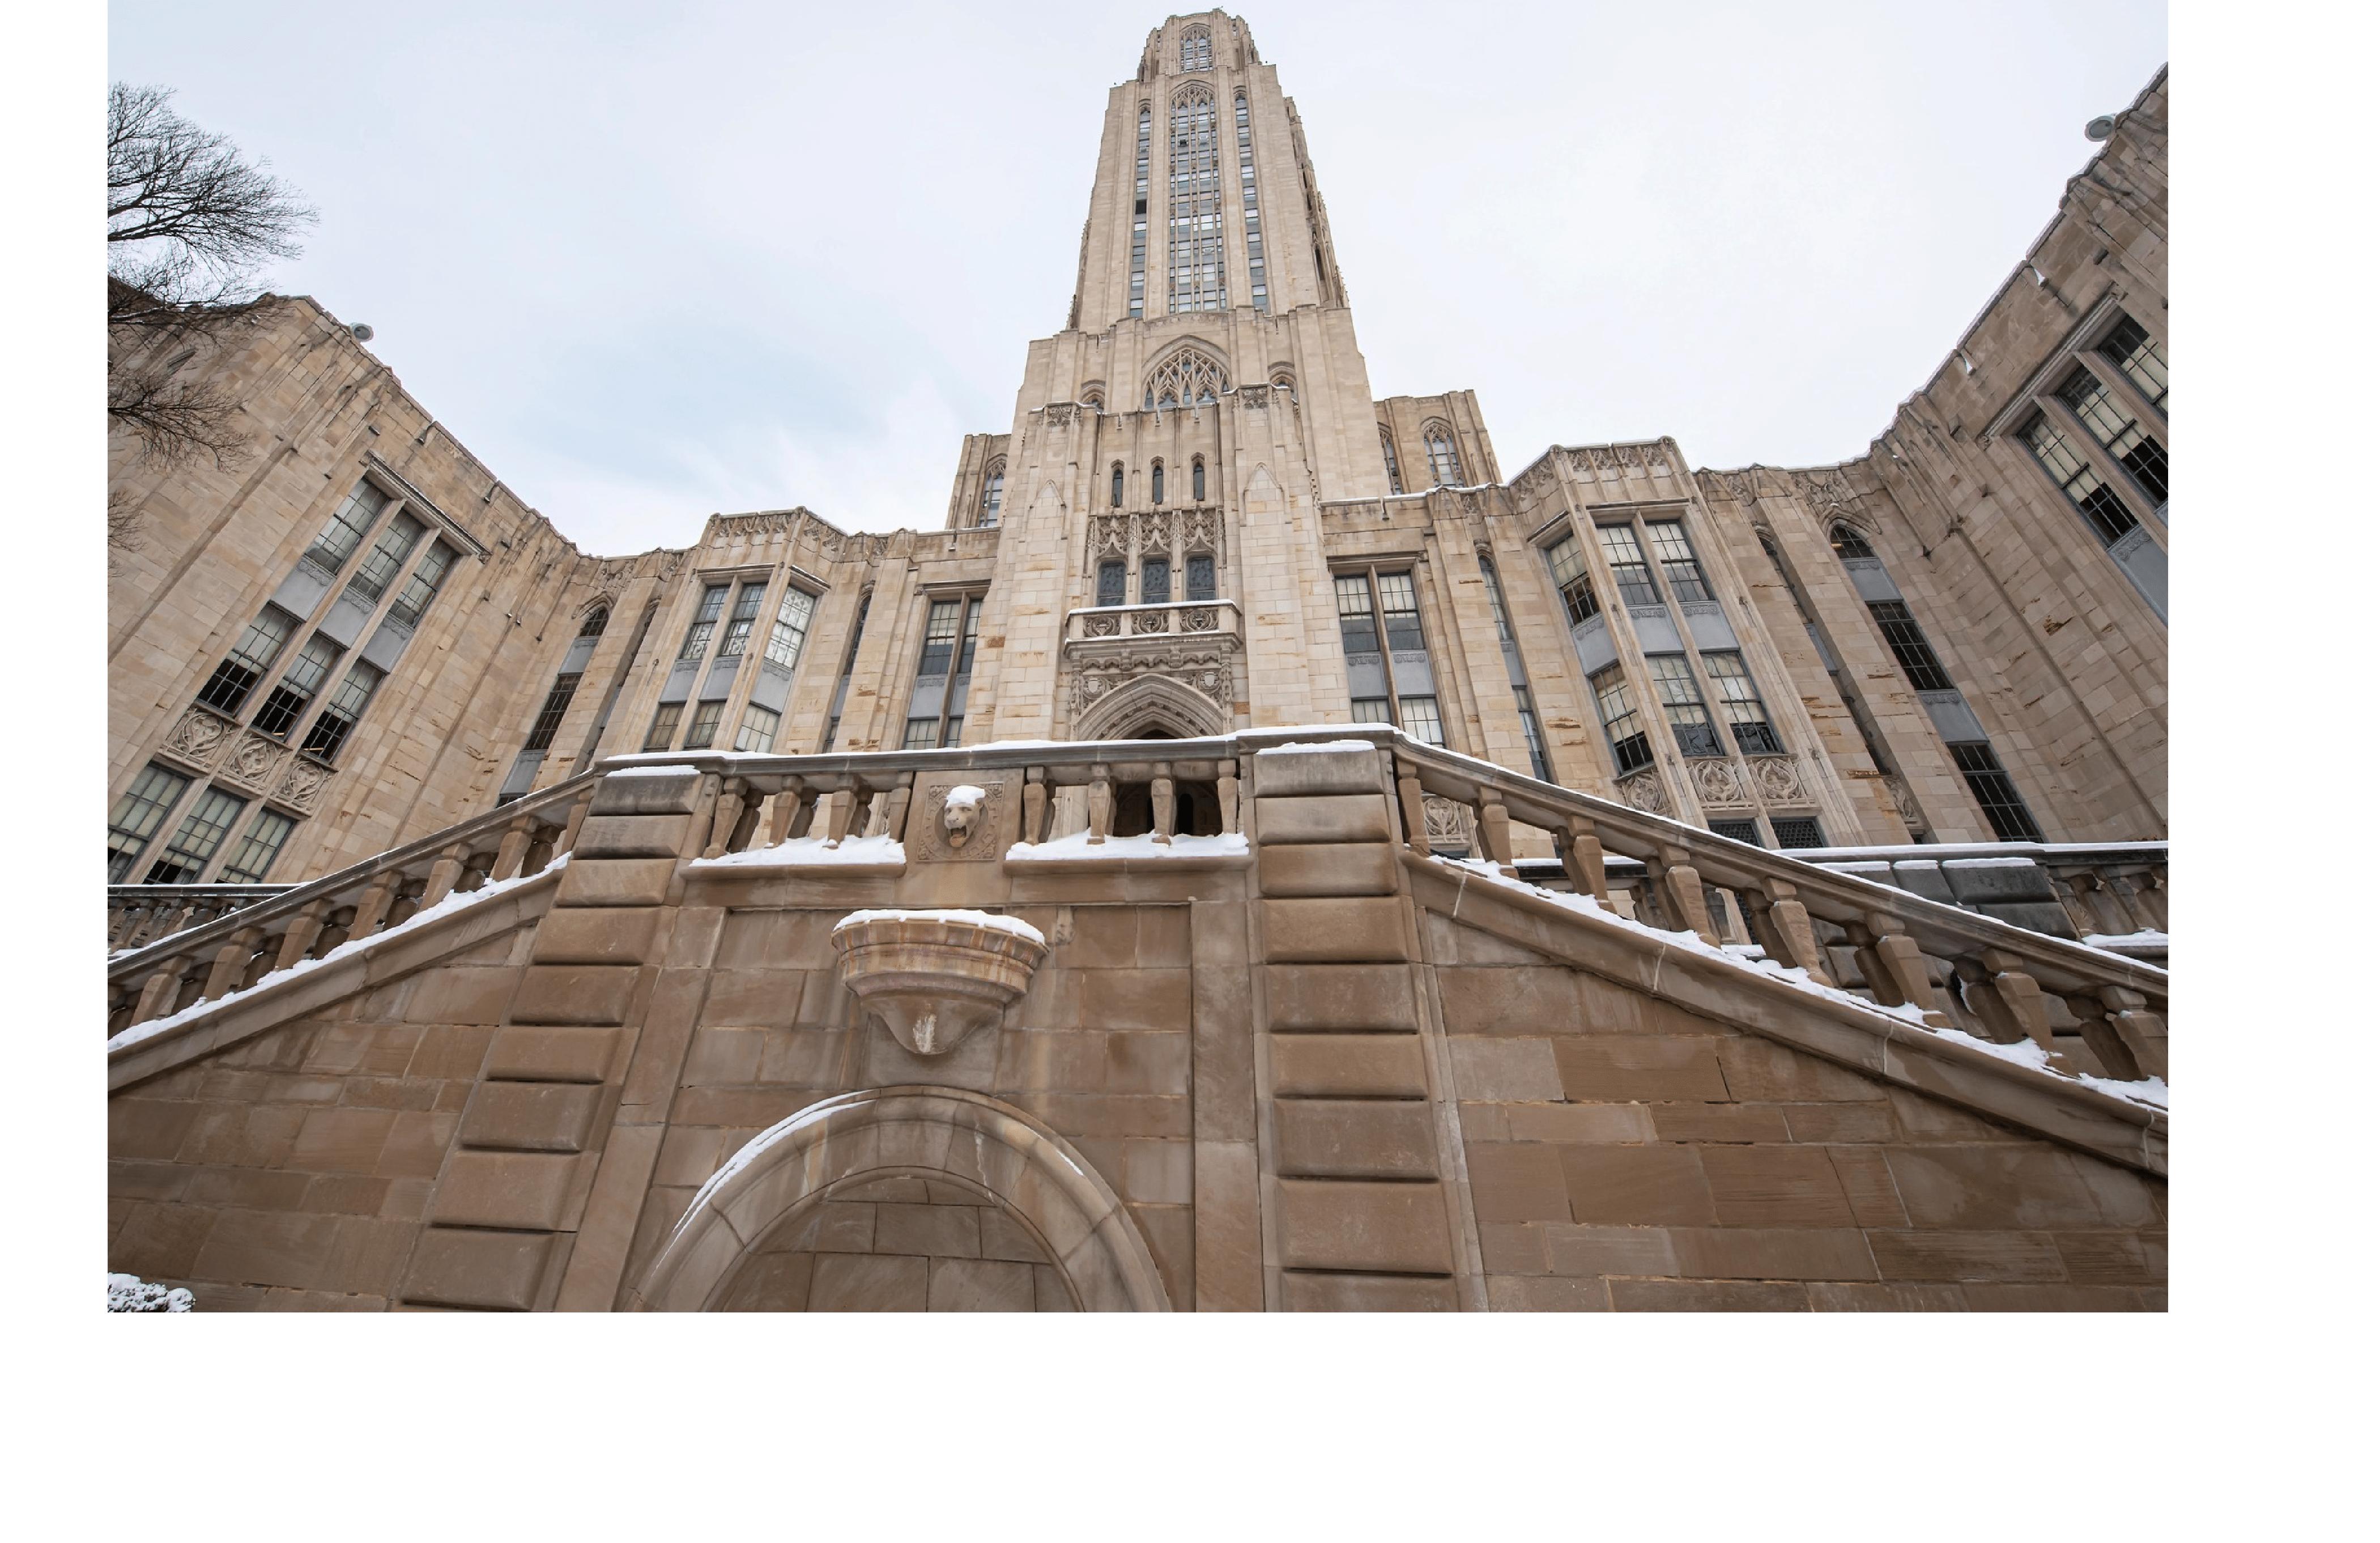 A tall building on the University of Pittsburgh campus